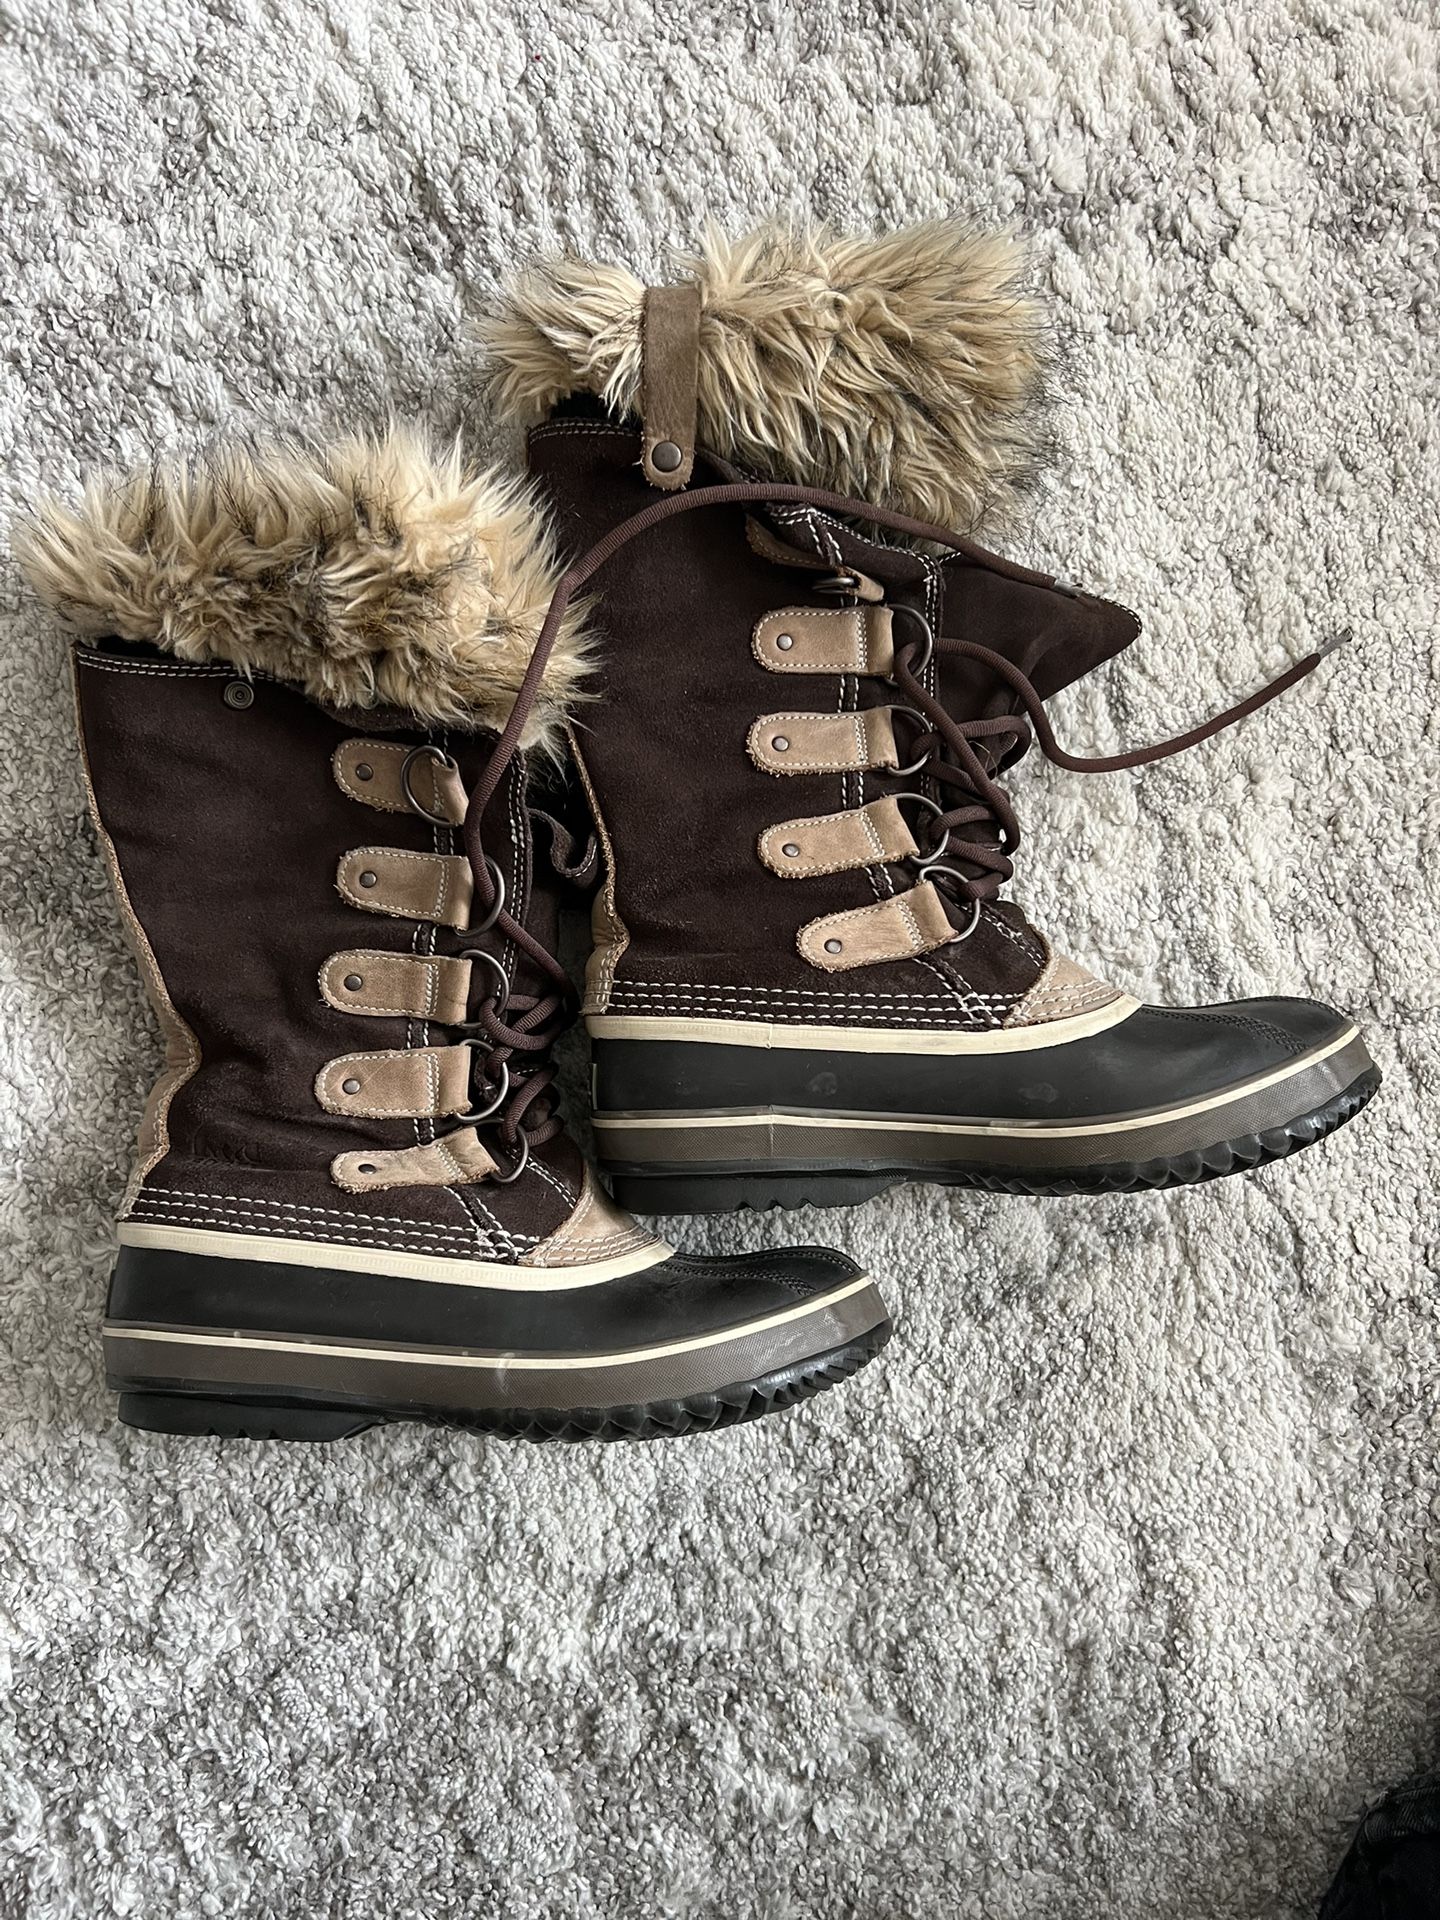 SOREL Women’s Size US 8 Waterproof Snow Boots Hand Crafted Natural Rubber Brown